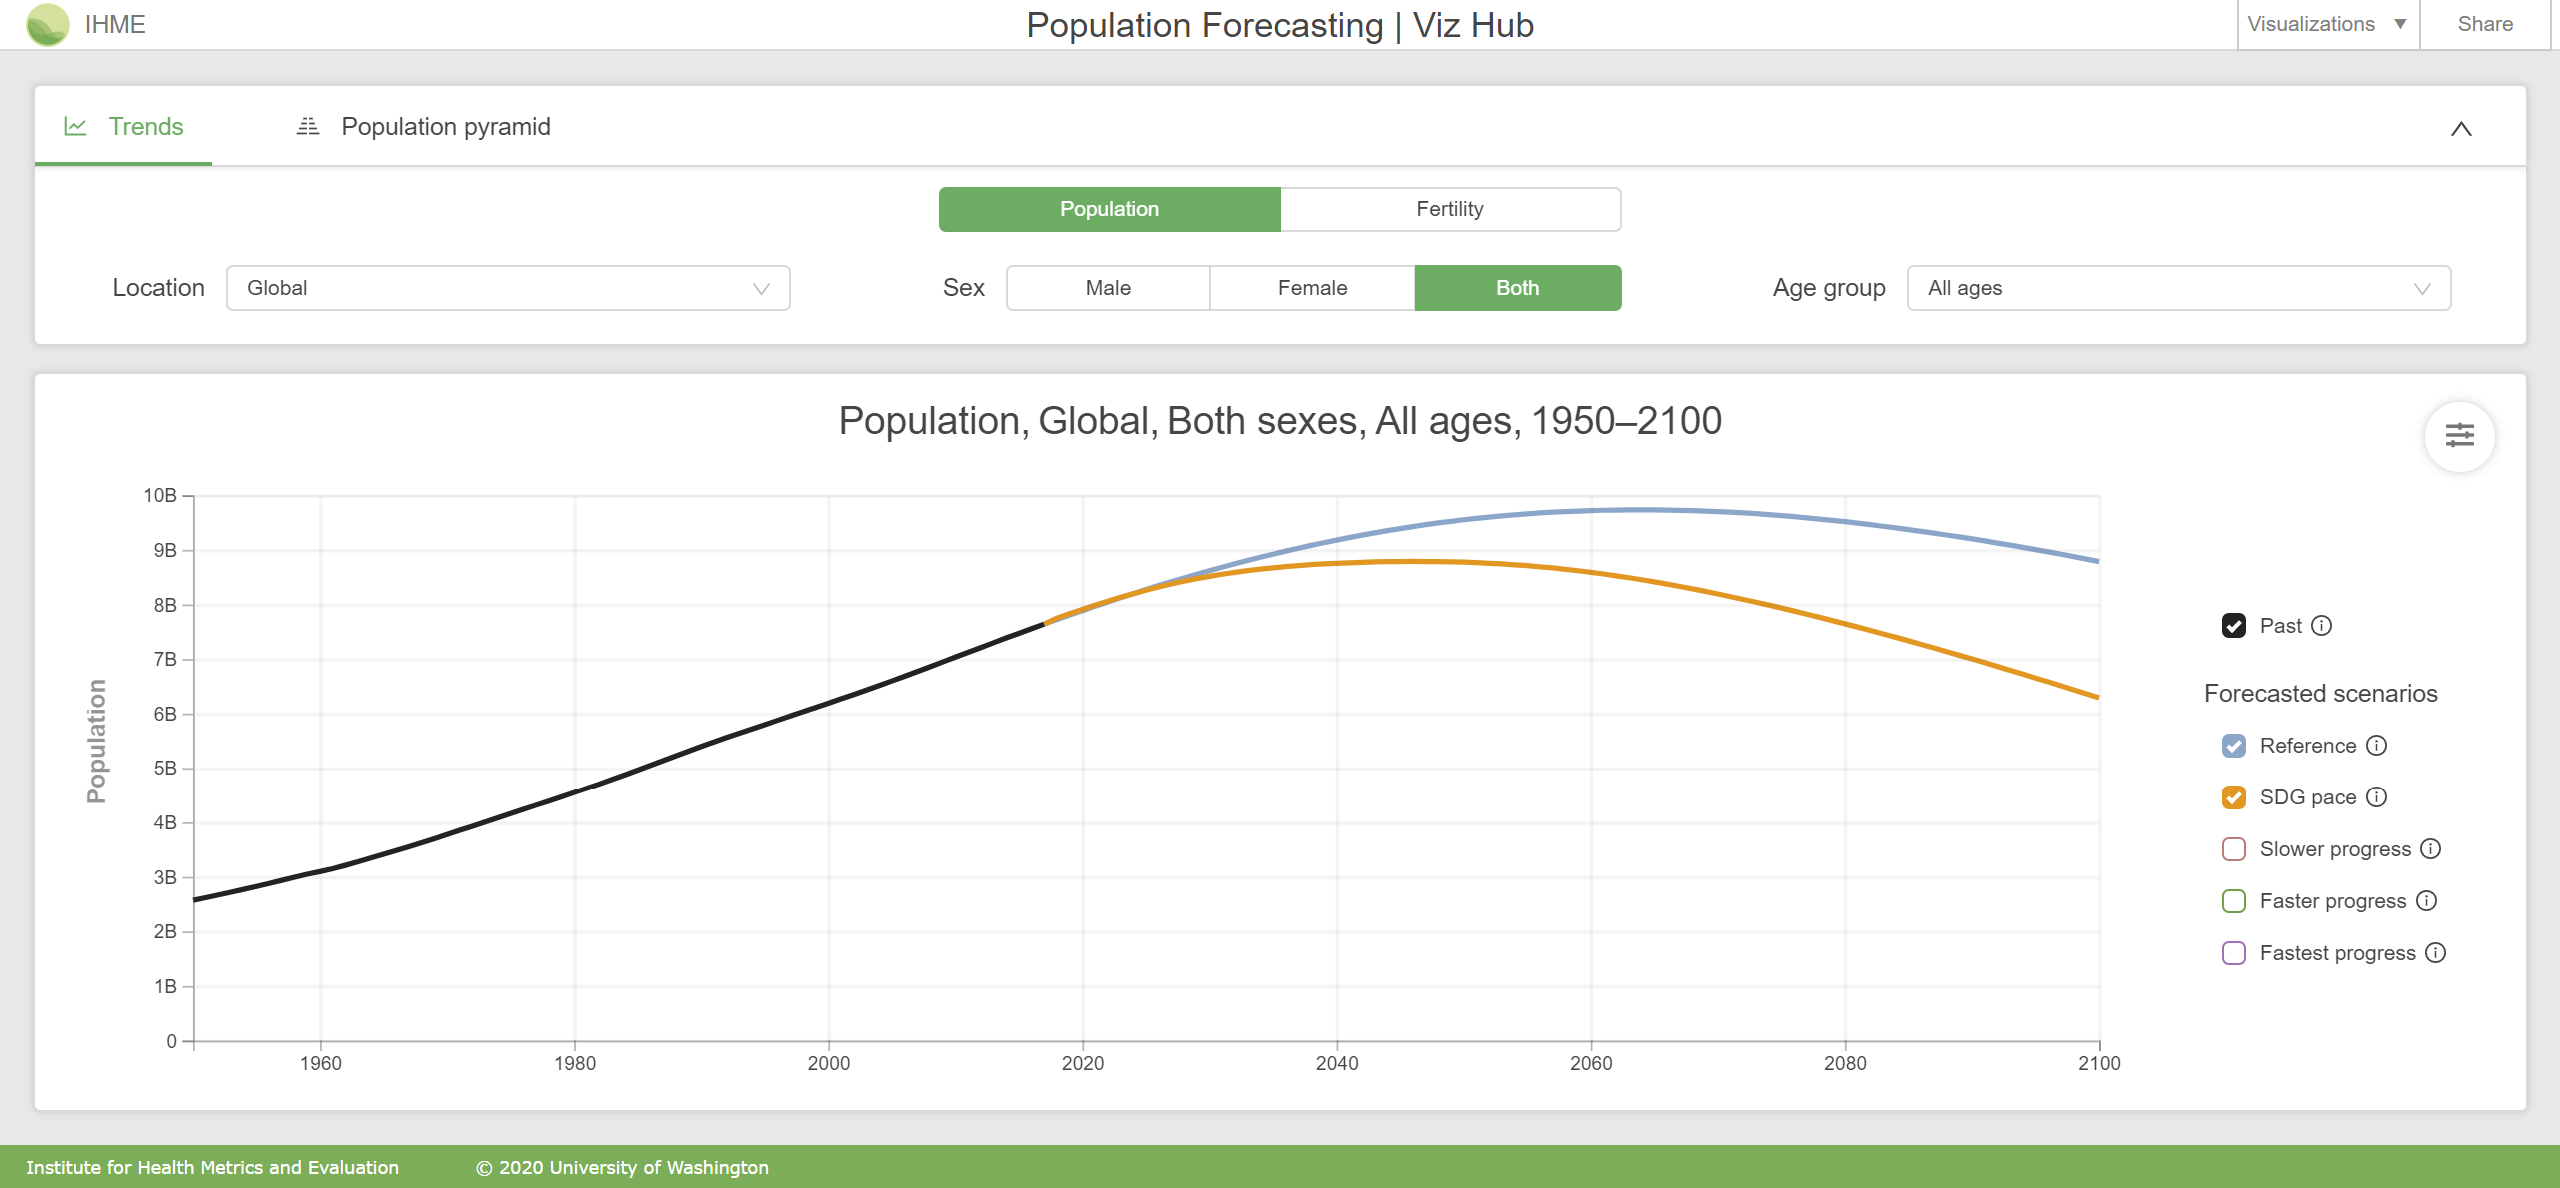 Interact with the Population Forecasting visualization